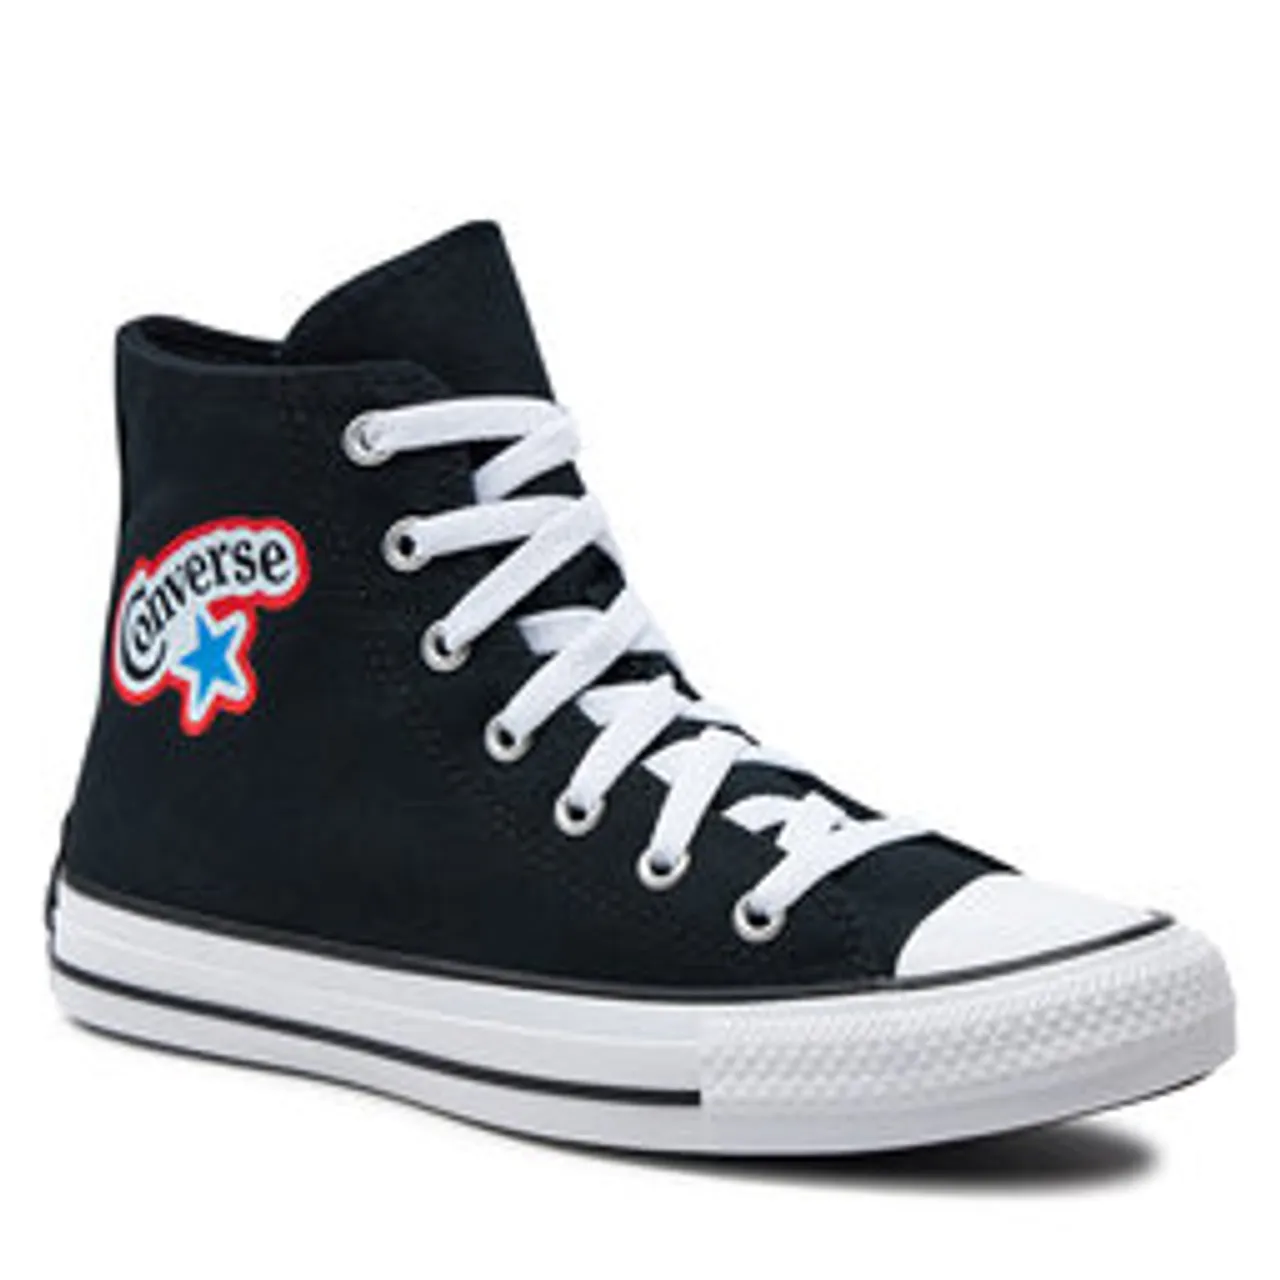 Sneakers aus Stoff Converse Chuck Taylor All Star Stickers A06313C Black/White/Fever Dream